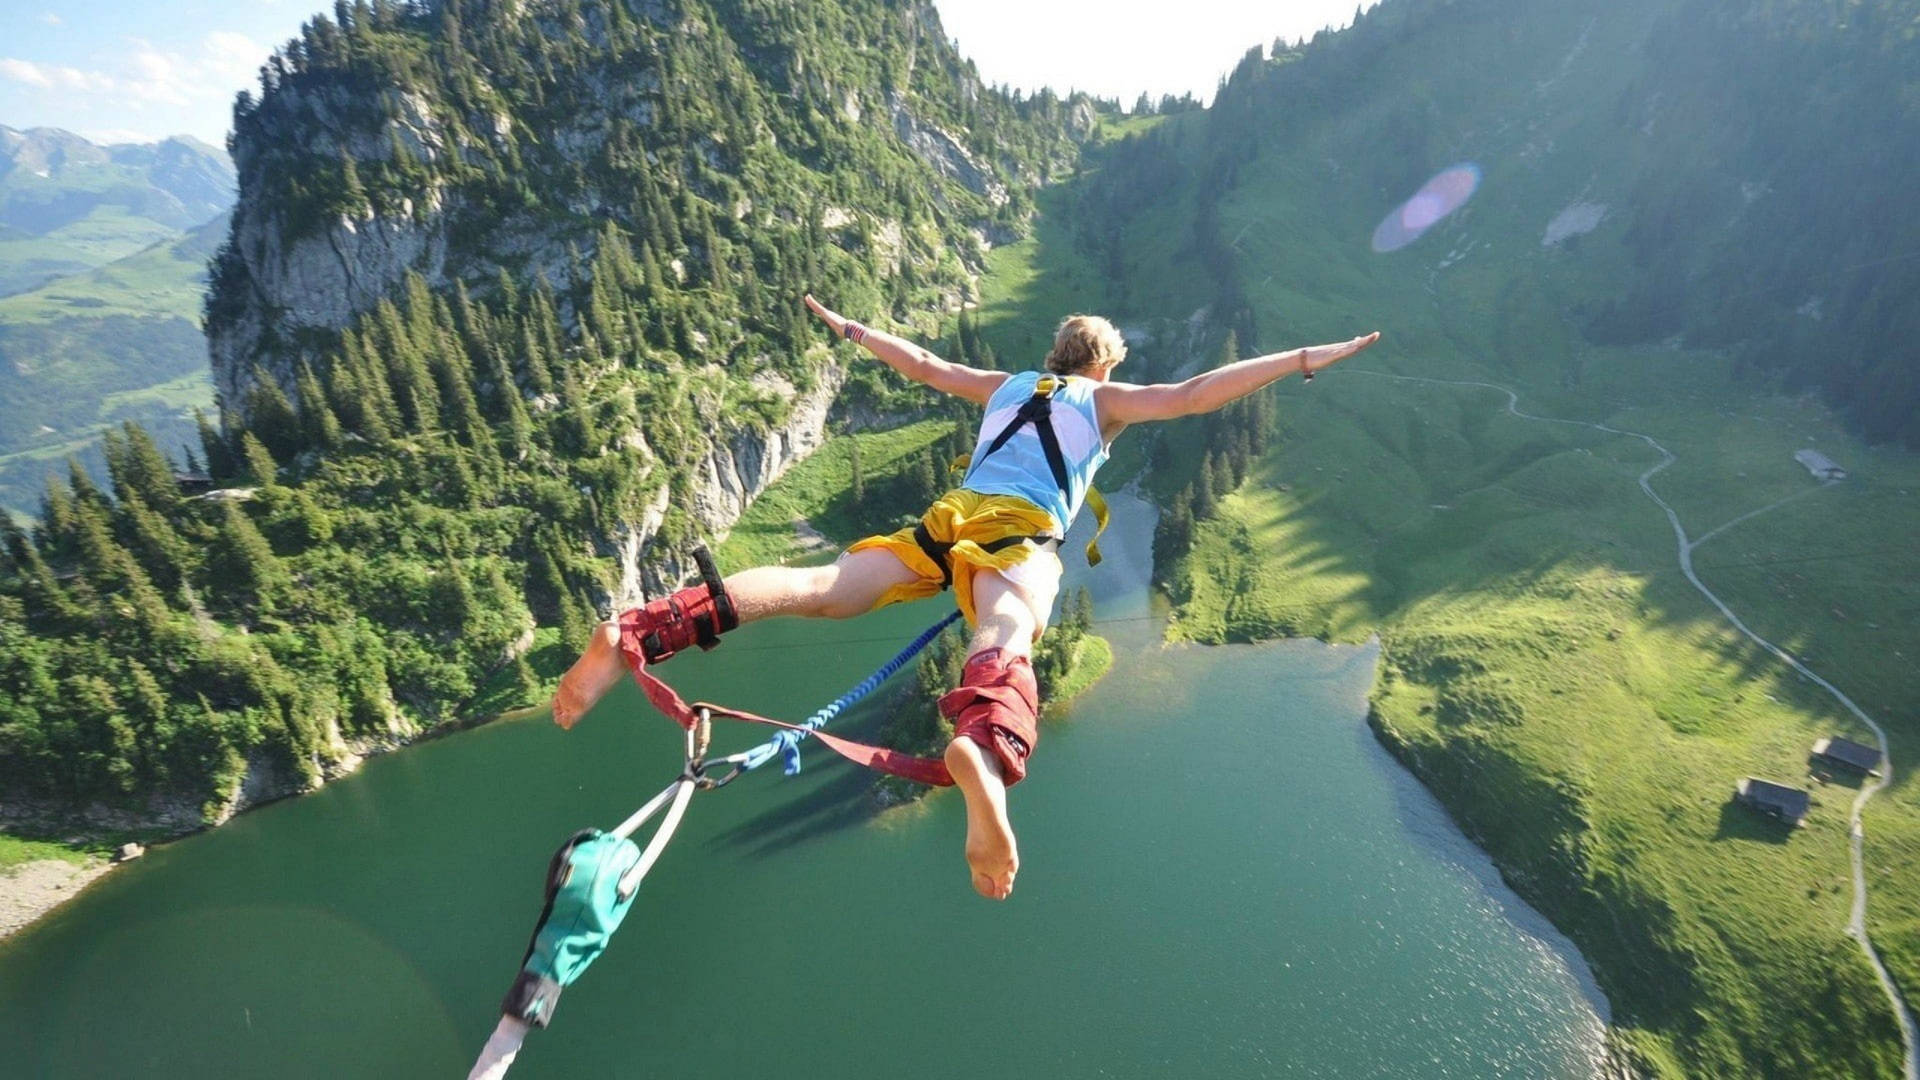 Captivating Leap Of Faith In Extreme Sports: Bungee Jumping Background